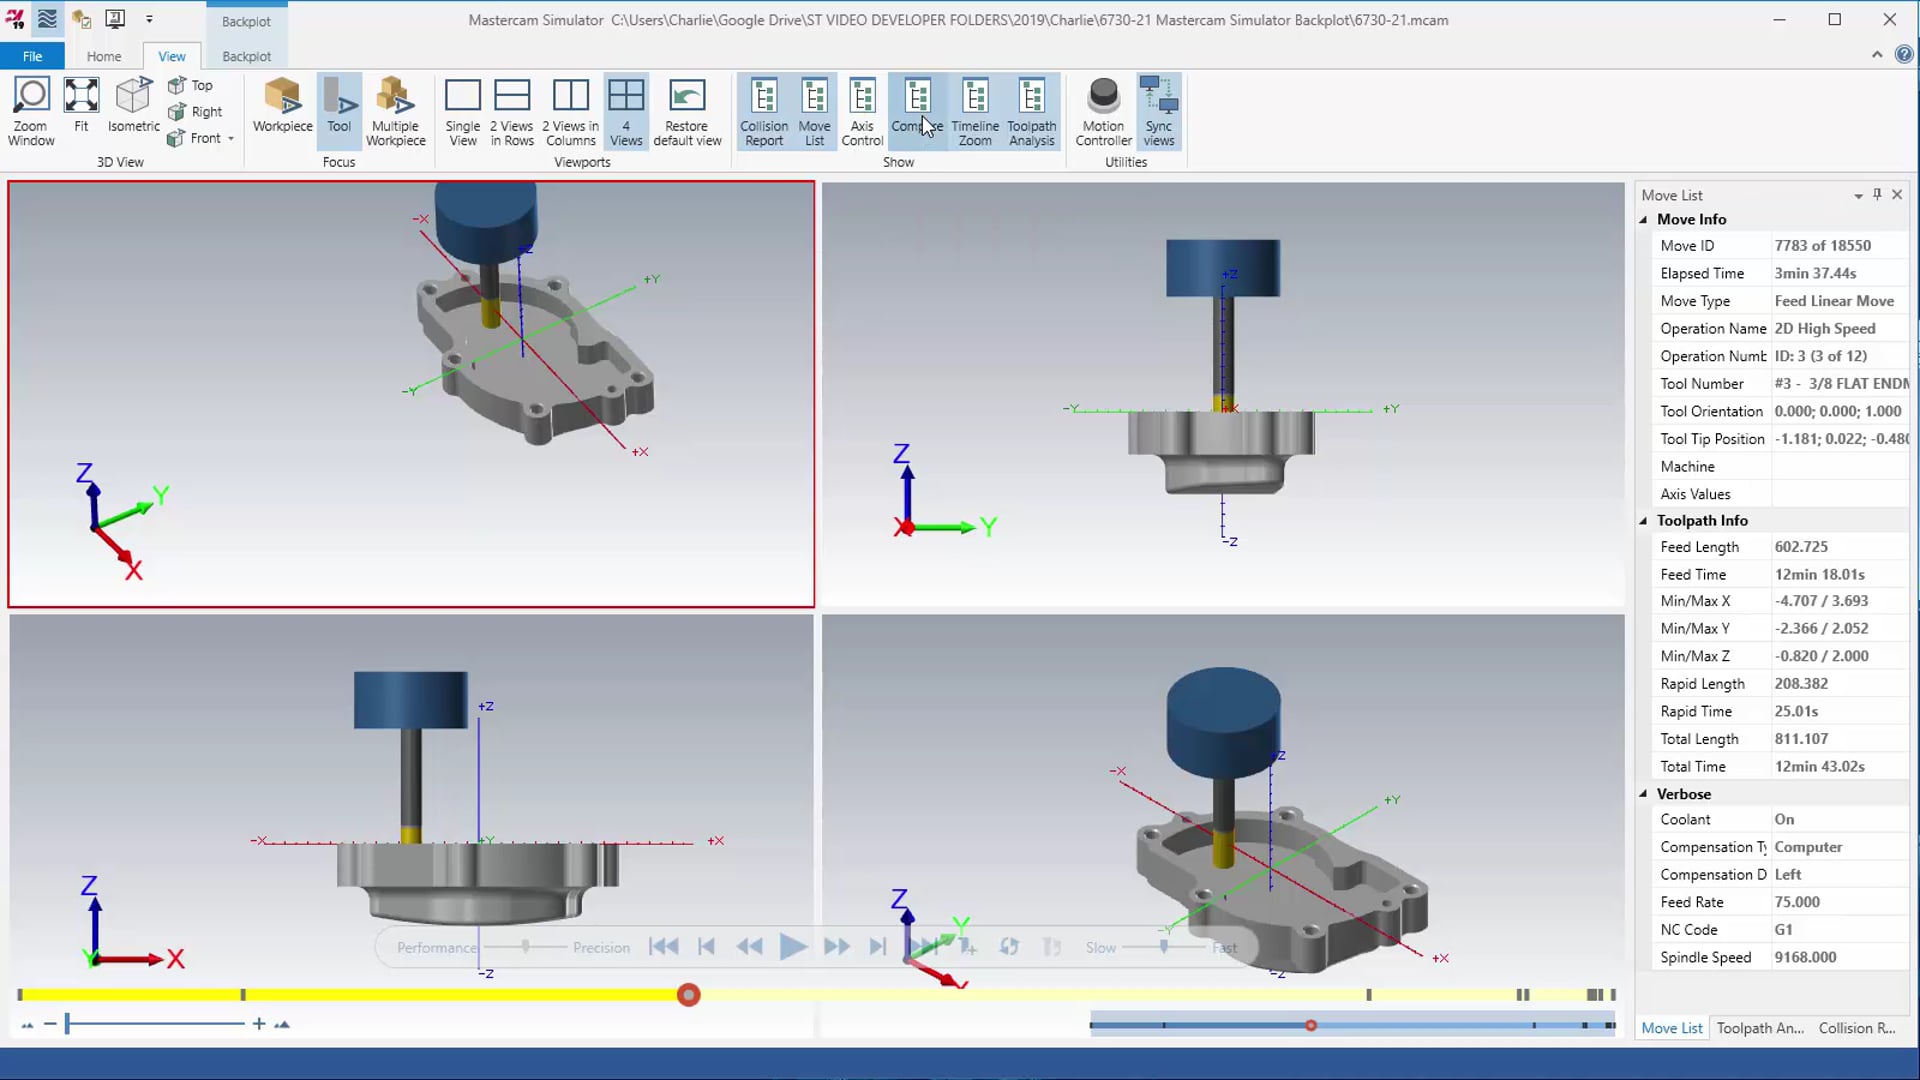 Toolpath and Machining Management